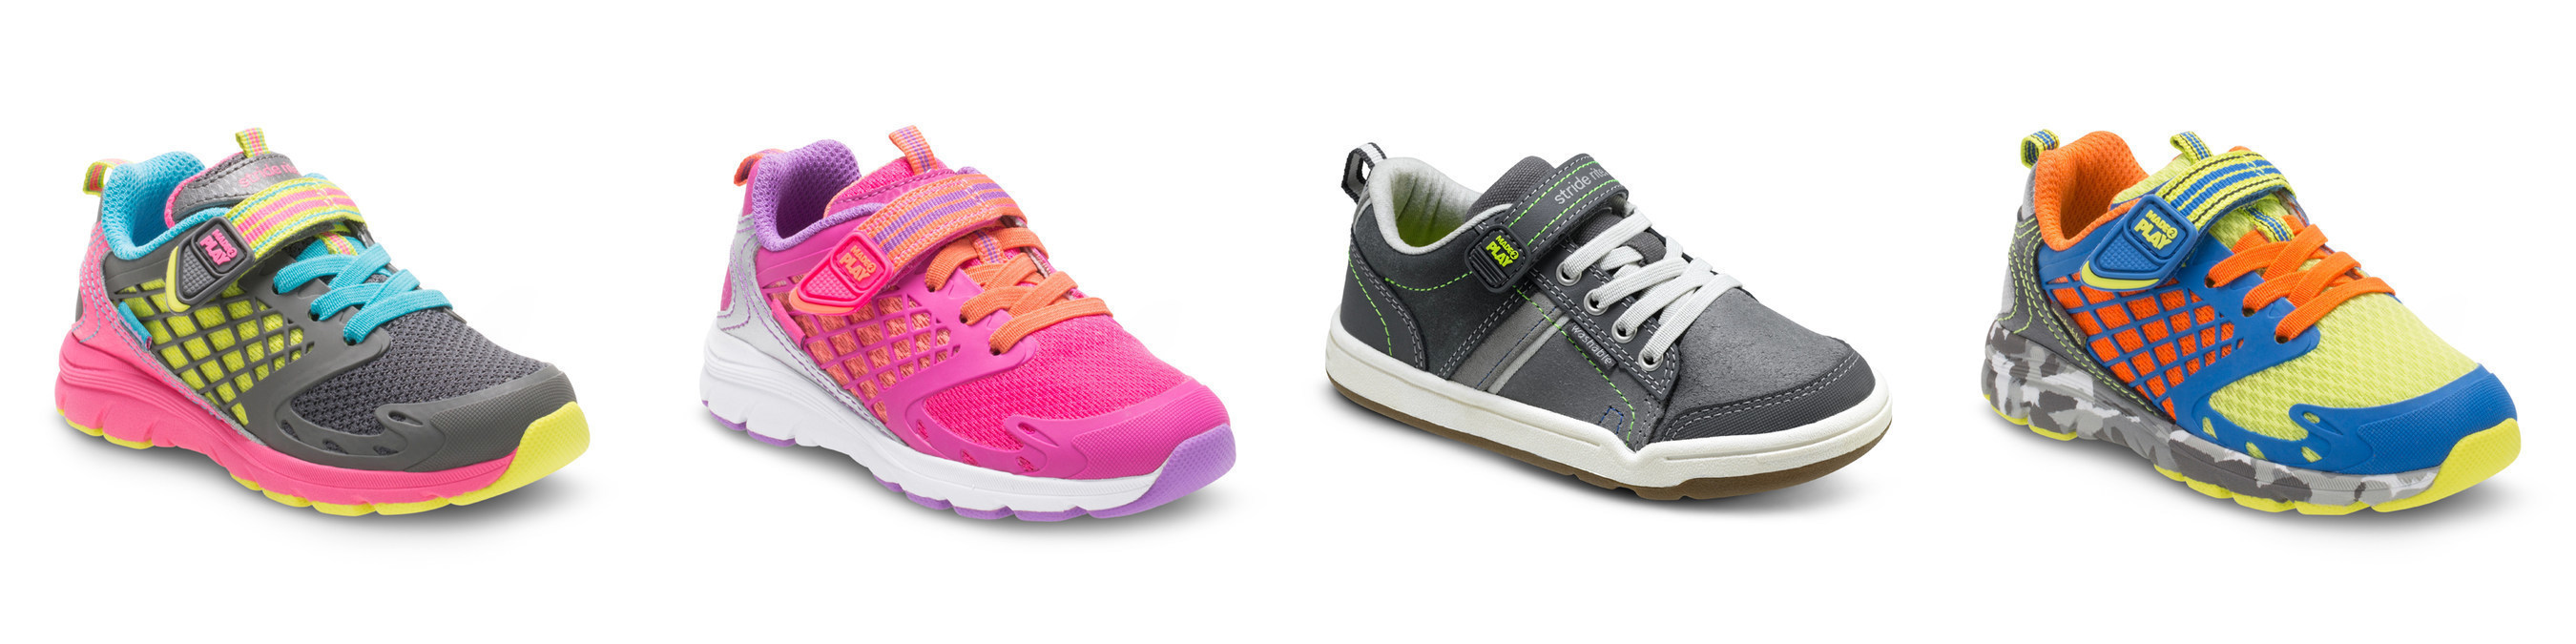 Stride Rite is offering customers a can't-miss BOGO sale on new shoes for the year ahead. In-store and online through September 5, 2016, buy one pair of shoes and get one 40% off, on select styles.